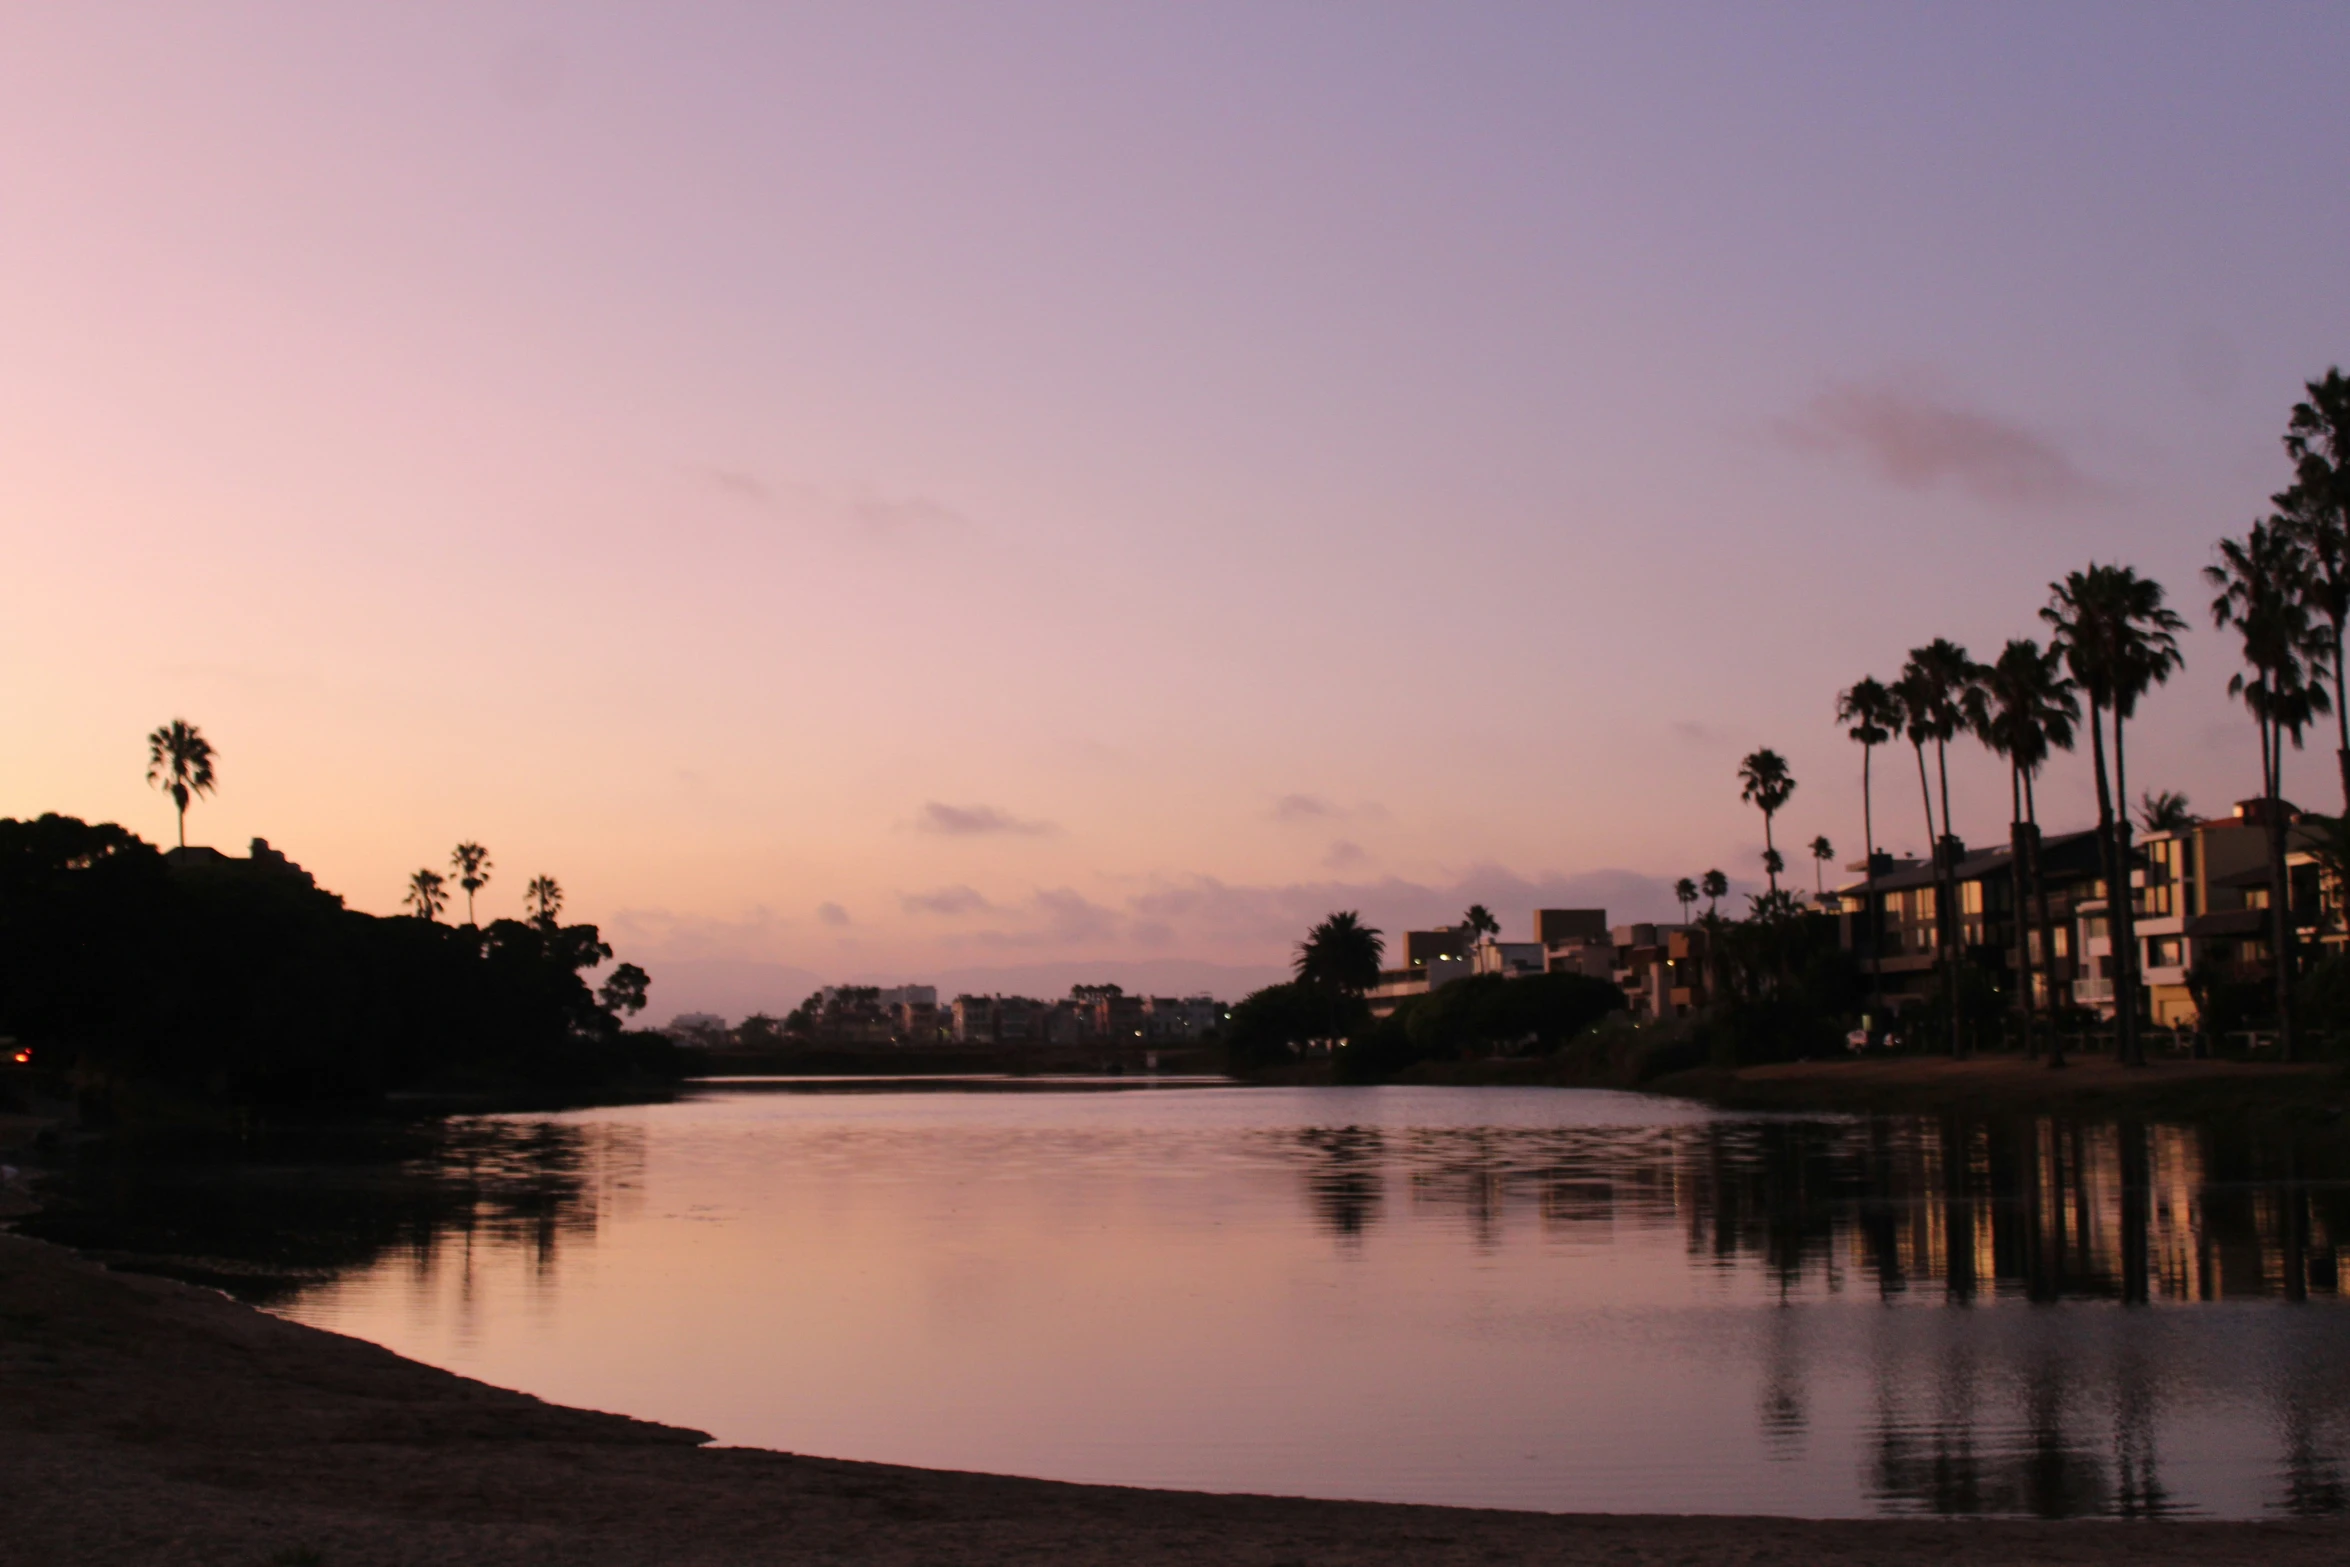 water with houses on the other side and palm trees at dusk